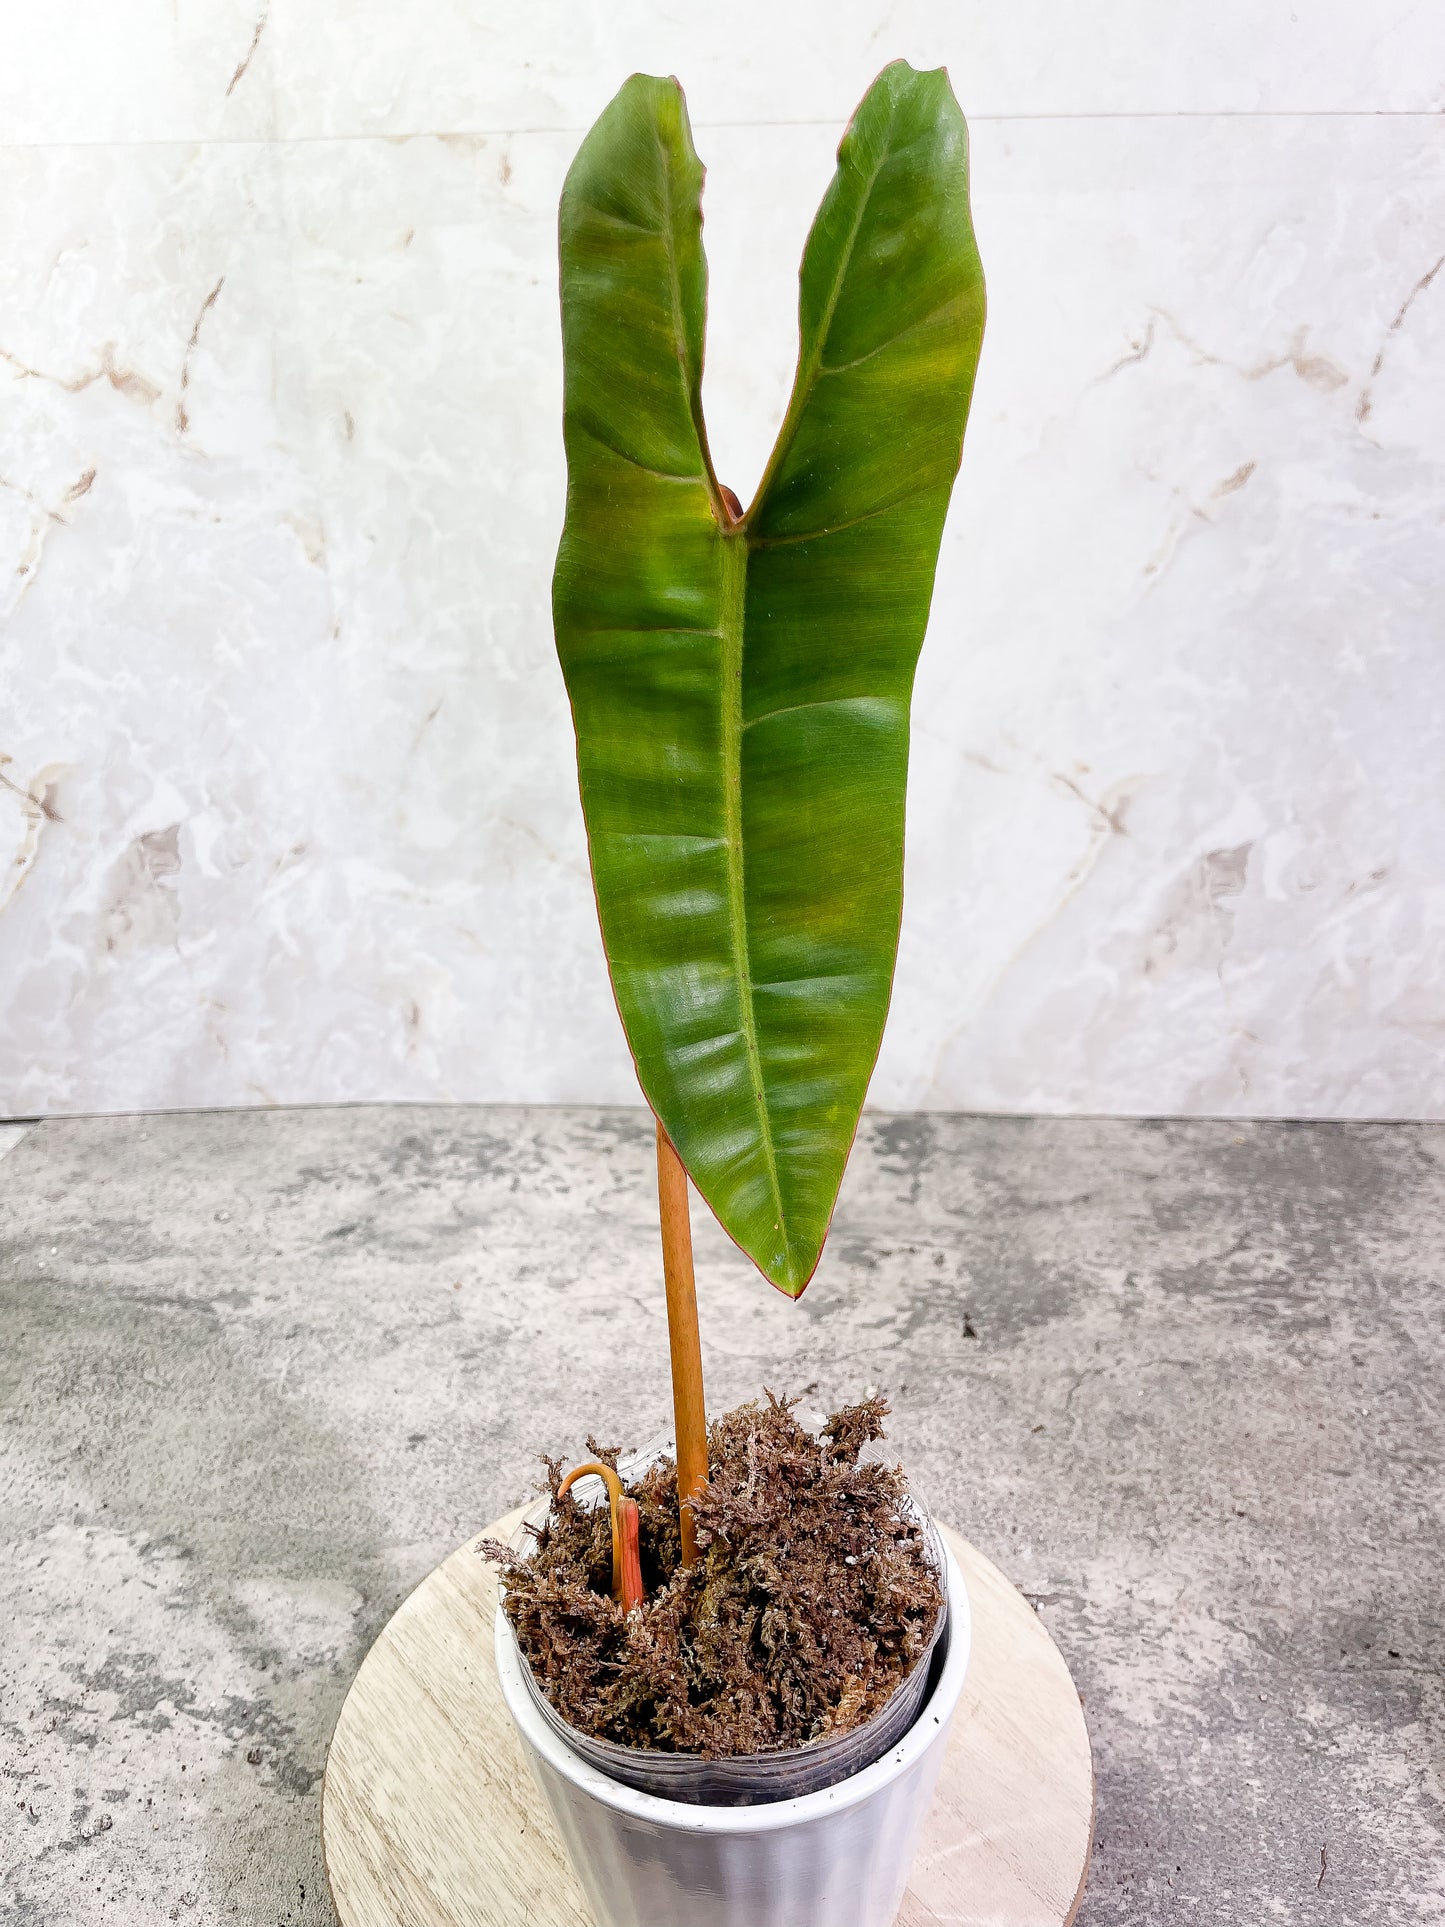 Philodendron Billietiae cutting with 1 leaf and 1 sprout slightly rooted top cutting